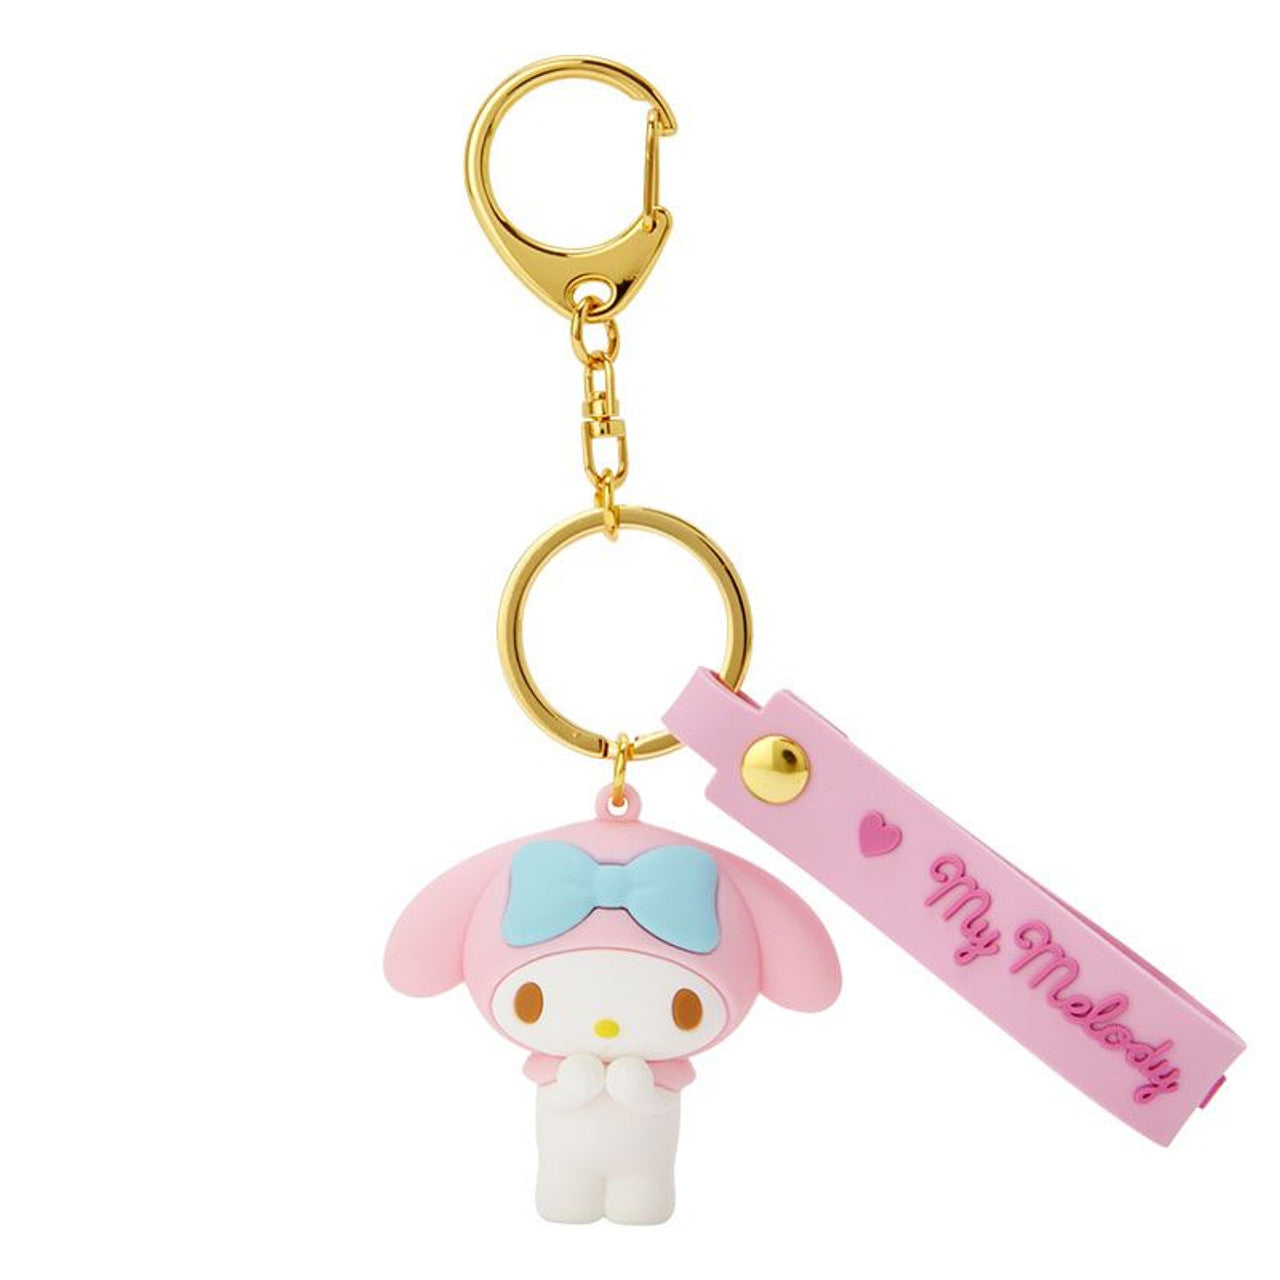 Sanrio Characters Key Ring with Plastic Mascot